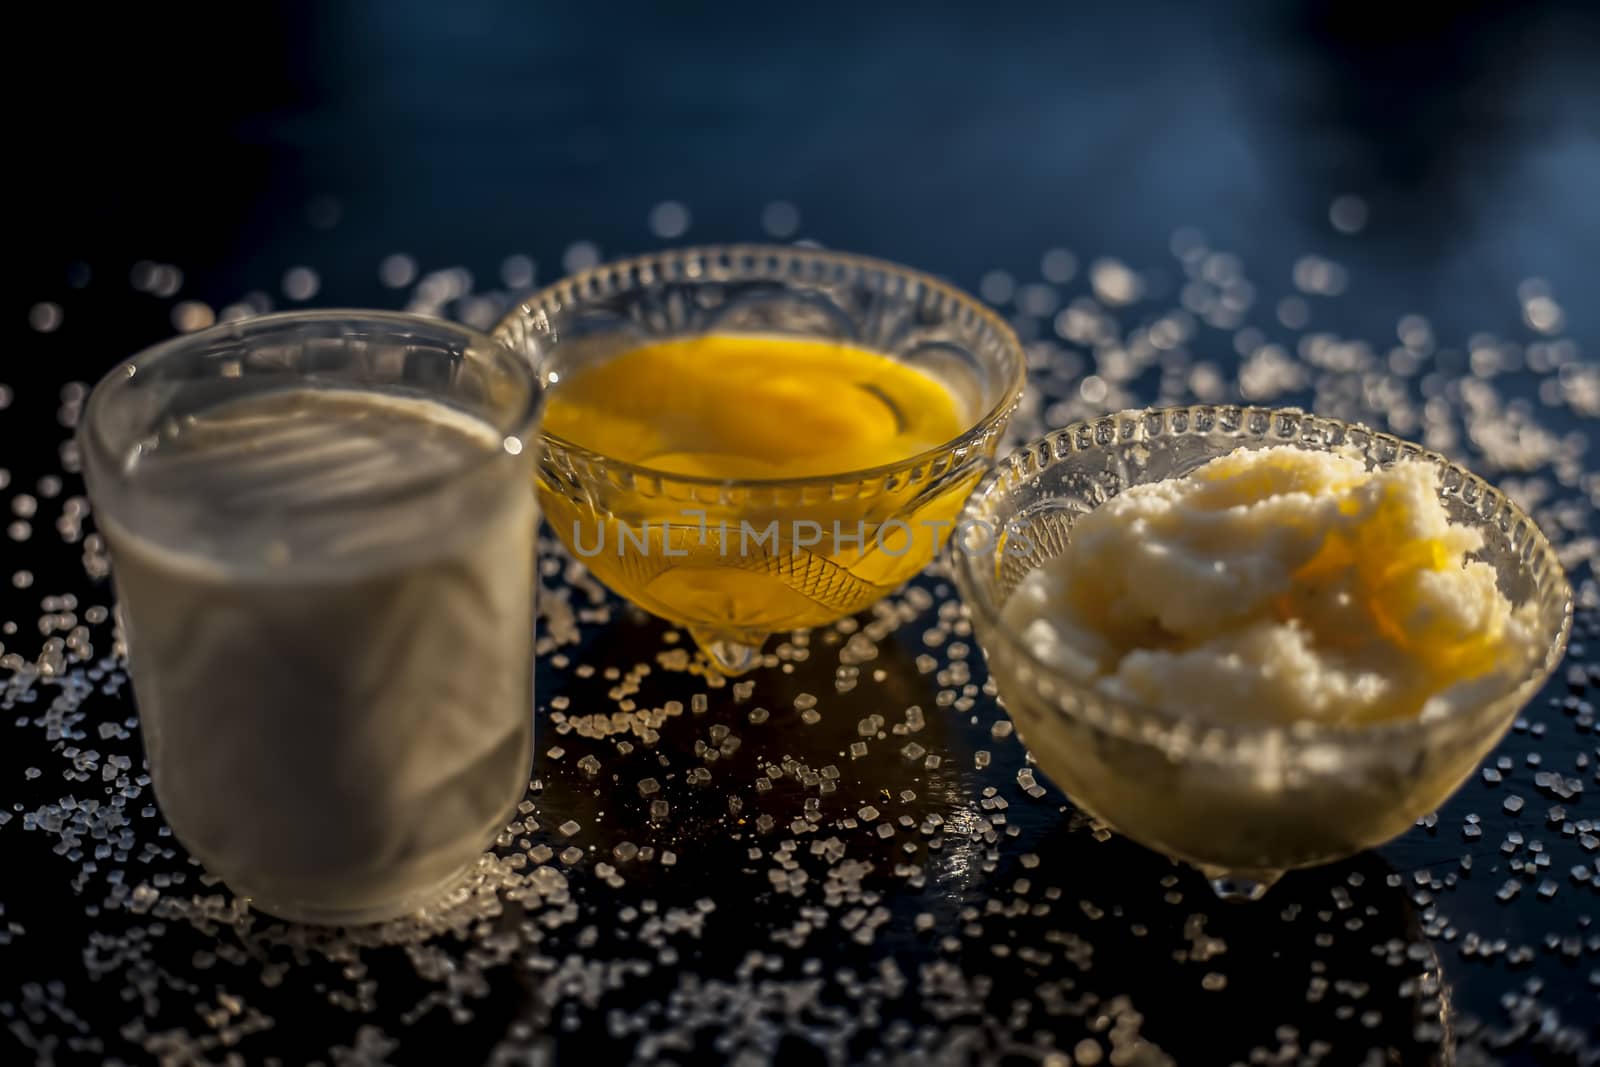 Close up shot of ayurvedic method or calcium supplement on the black surface consisting of raw eggs, milk, and ghee or clarified butter along with some sugar as a sweetener. by mirzamlk